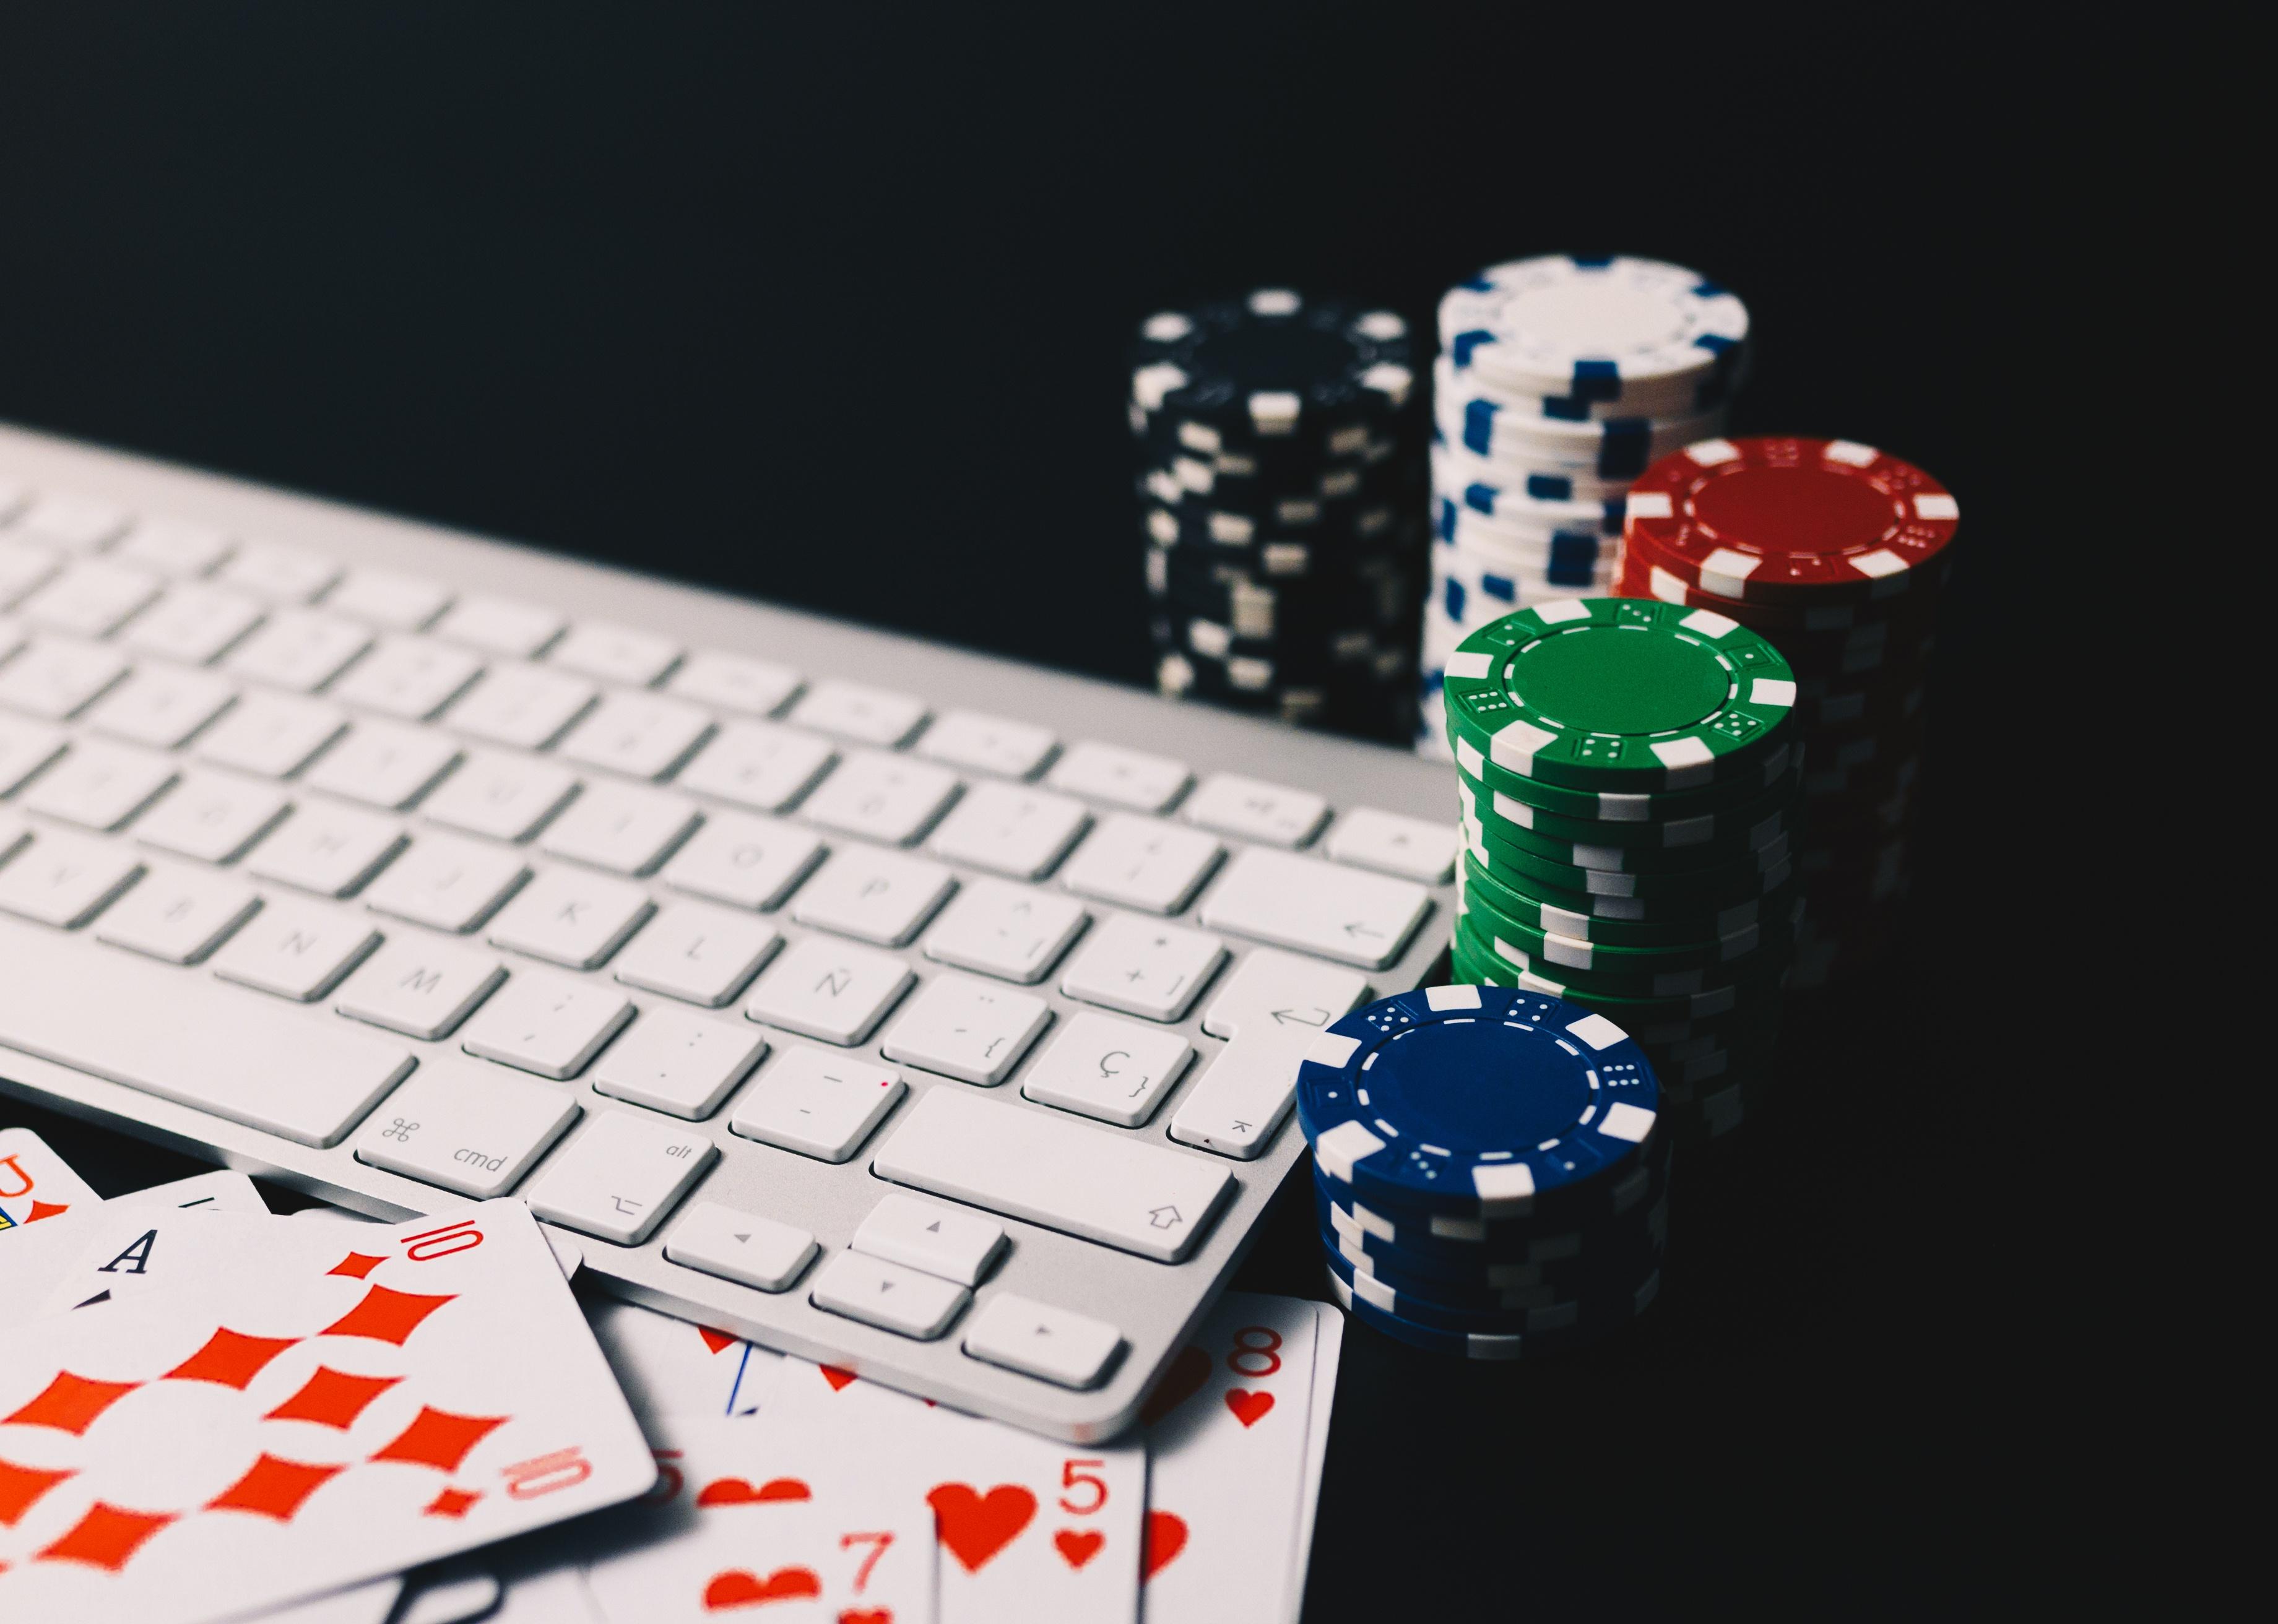 Poker chips and cards surrounding a computer keyboard.